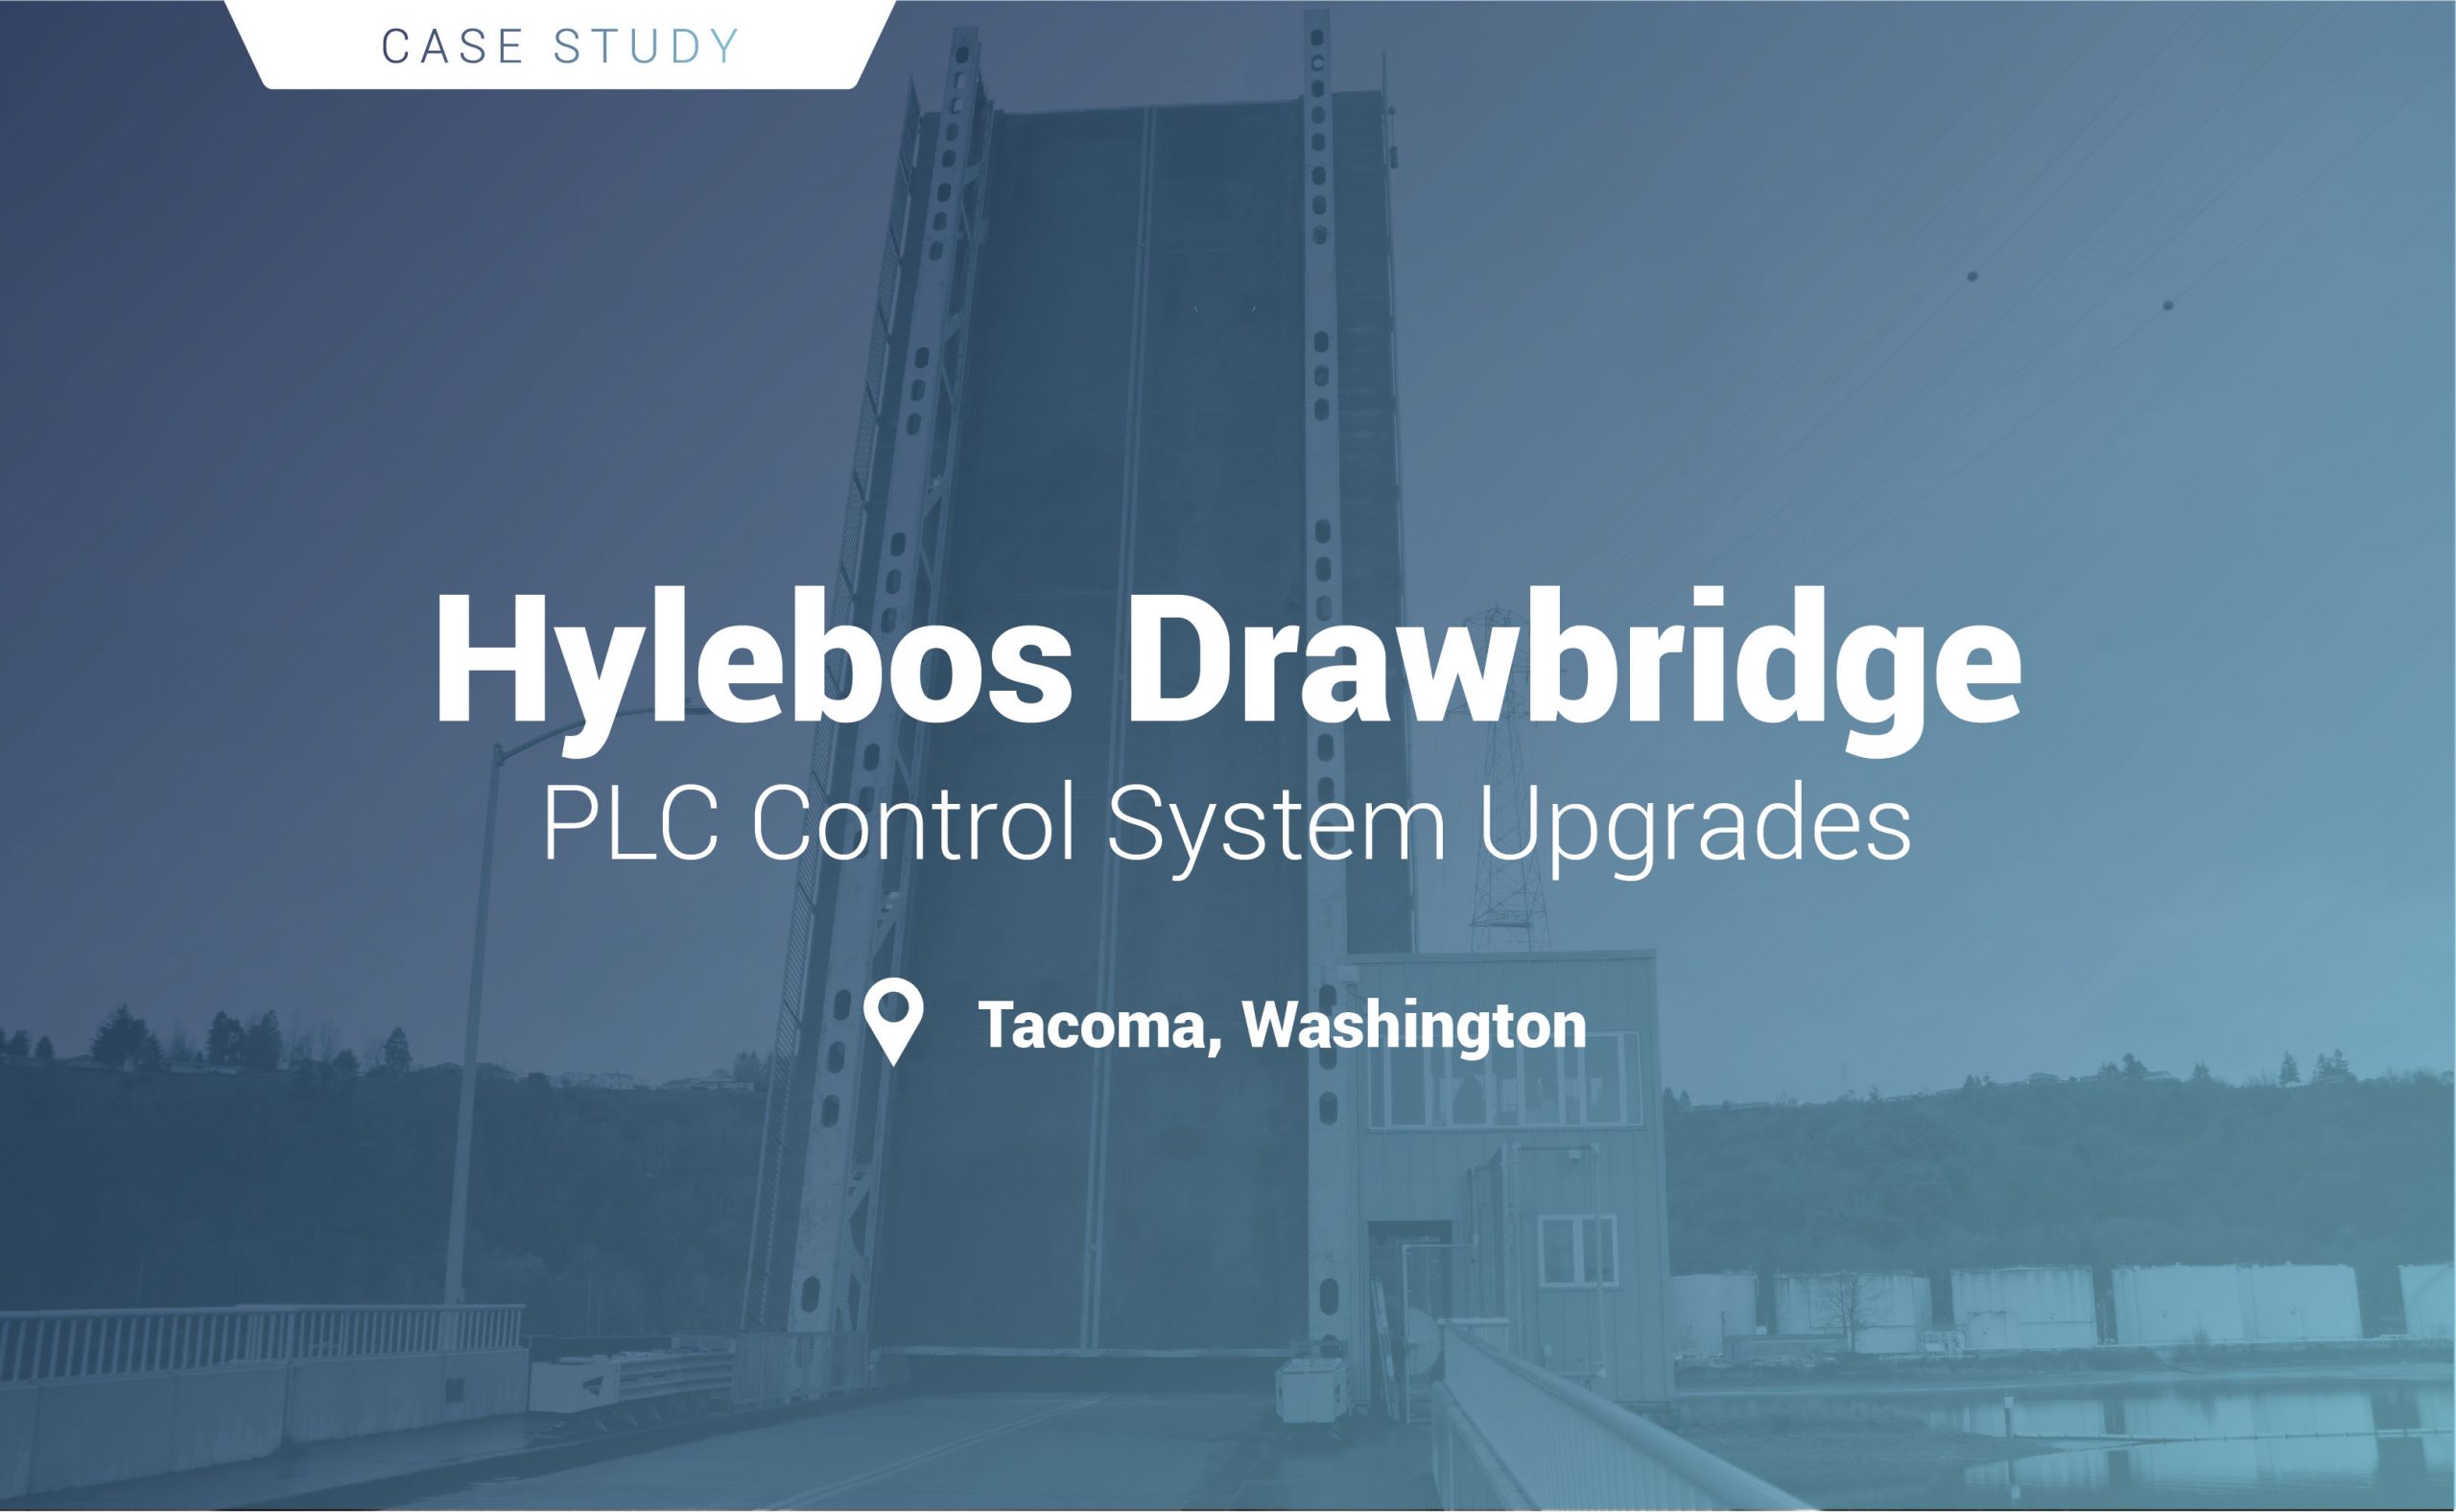 You are currently viewing Case Study: Hylebos Drawbridge PLC Control System Upgrades